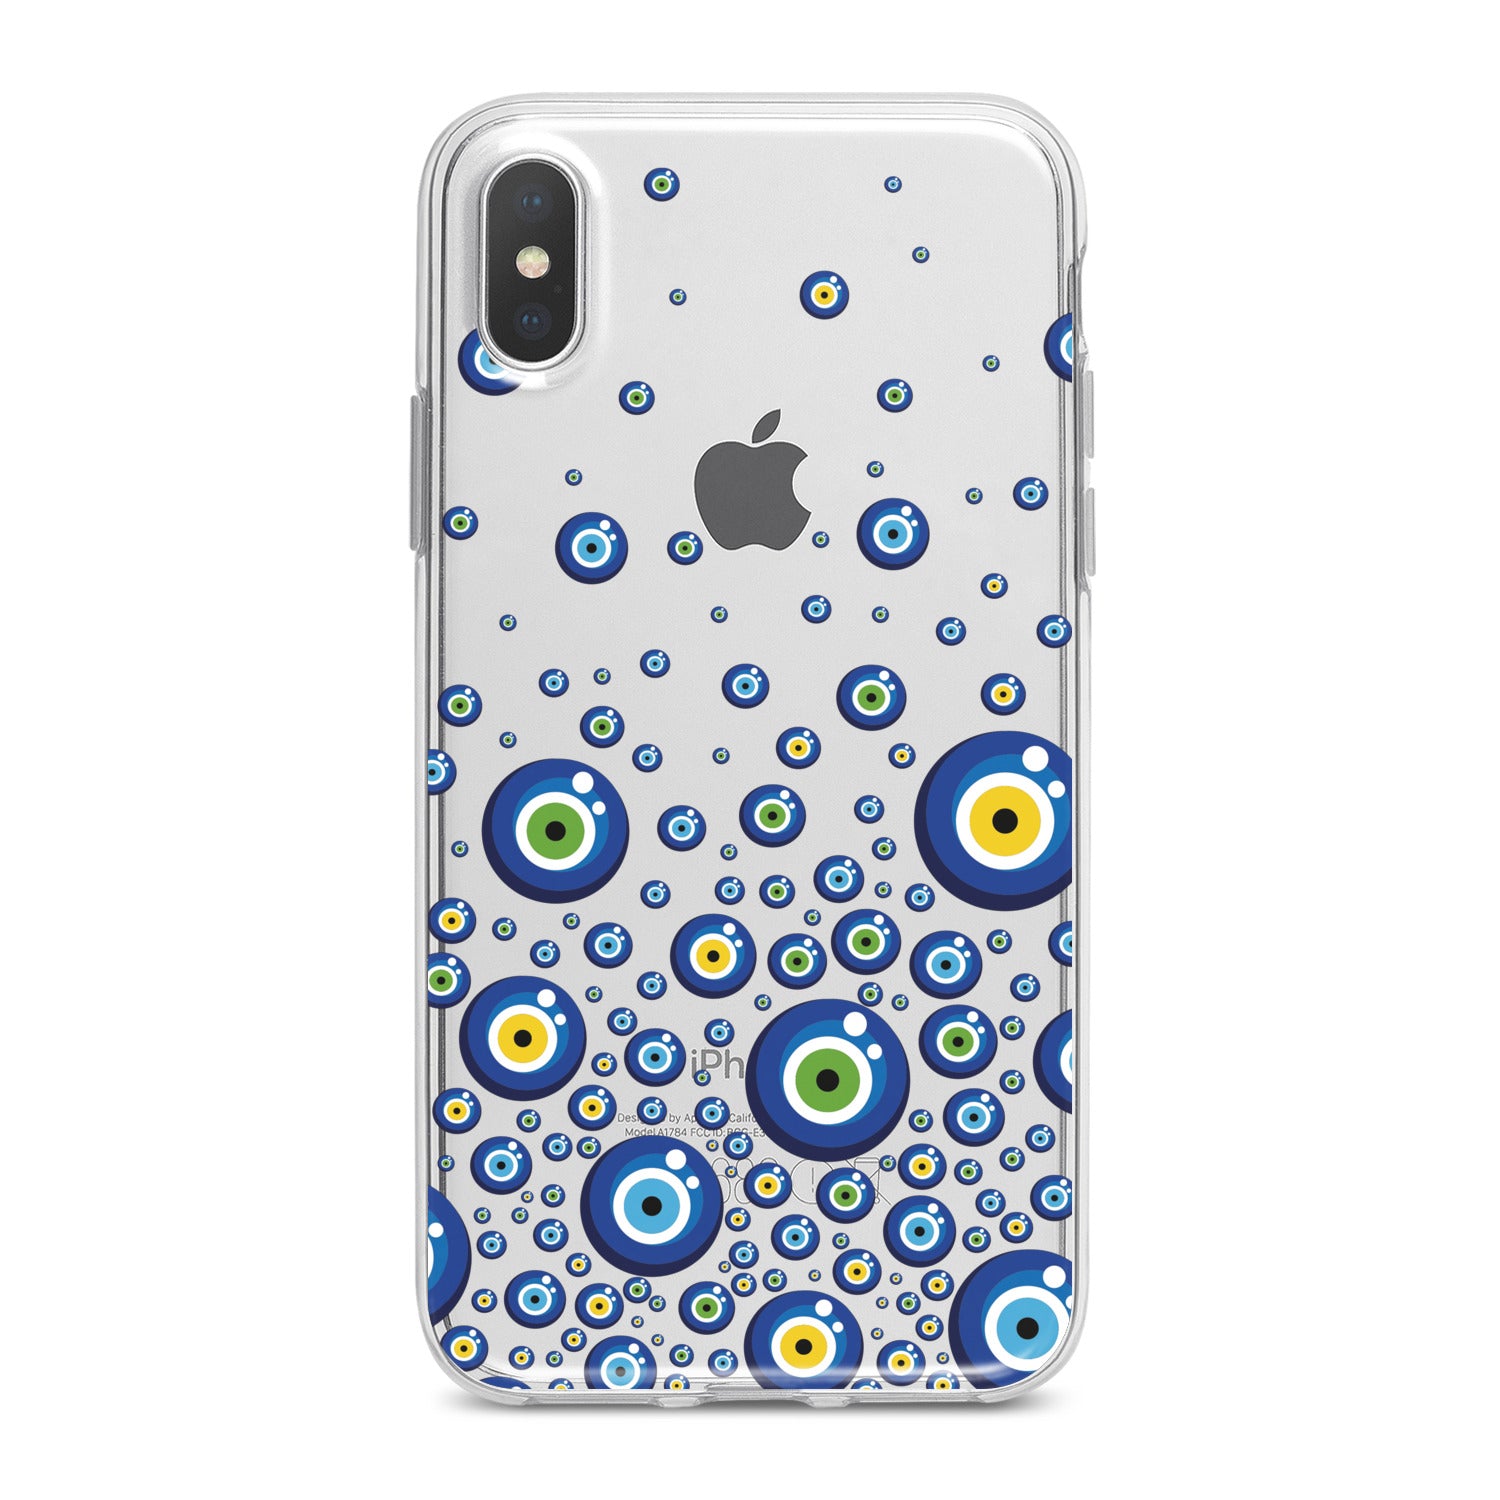 Lex Altern Fish Eyes Phone Case for your iPhone & Android phone.